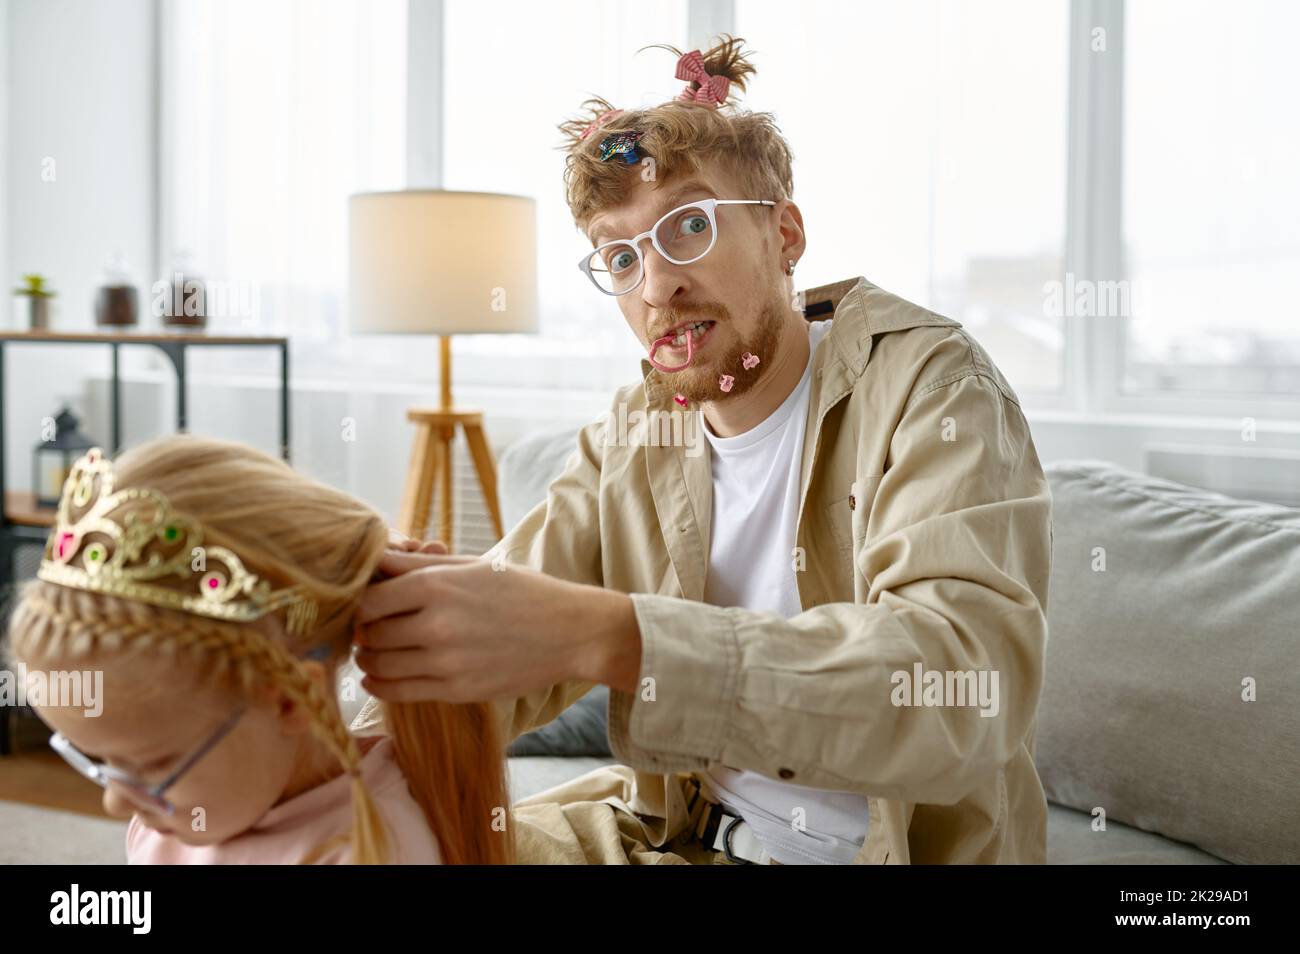 Father with crazy hairstyle making hair for daughter Stock Photo